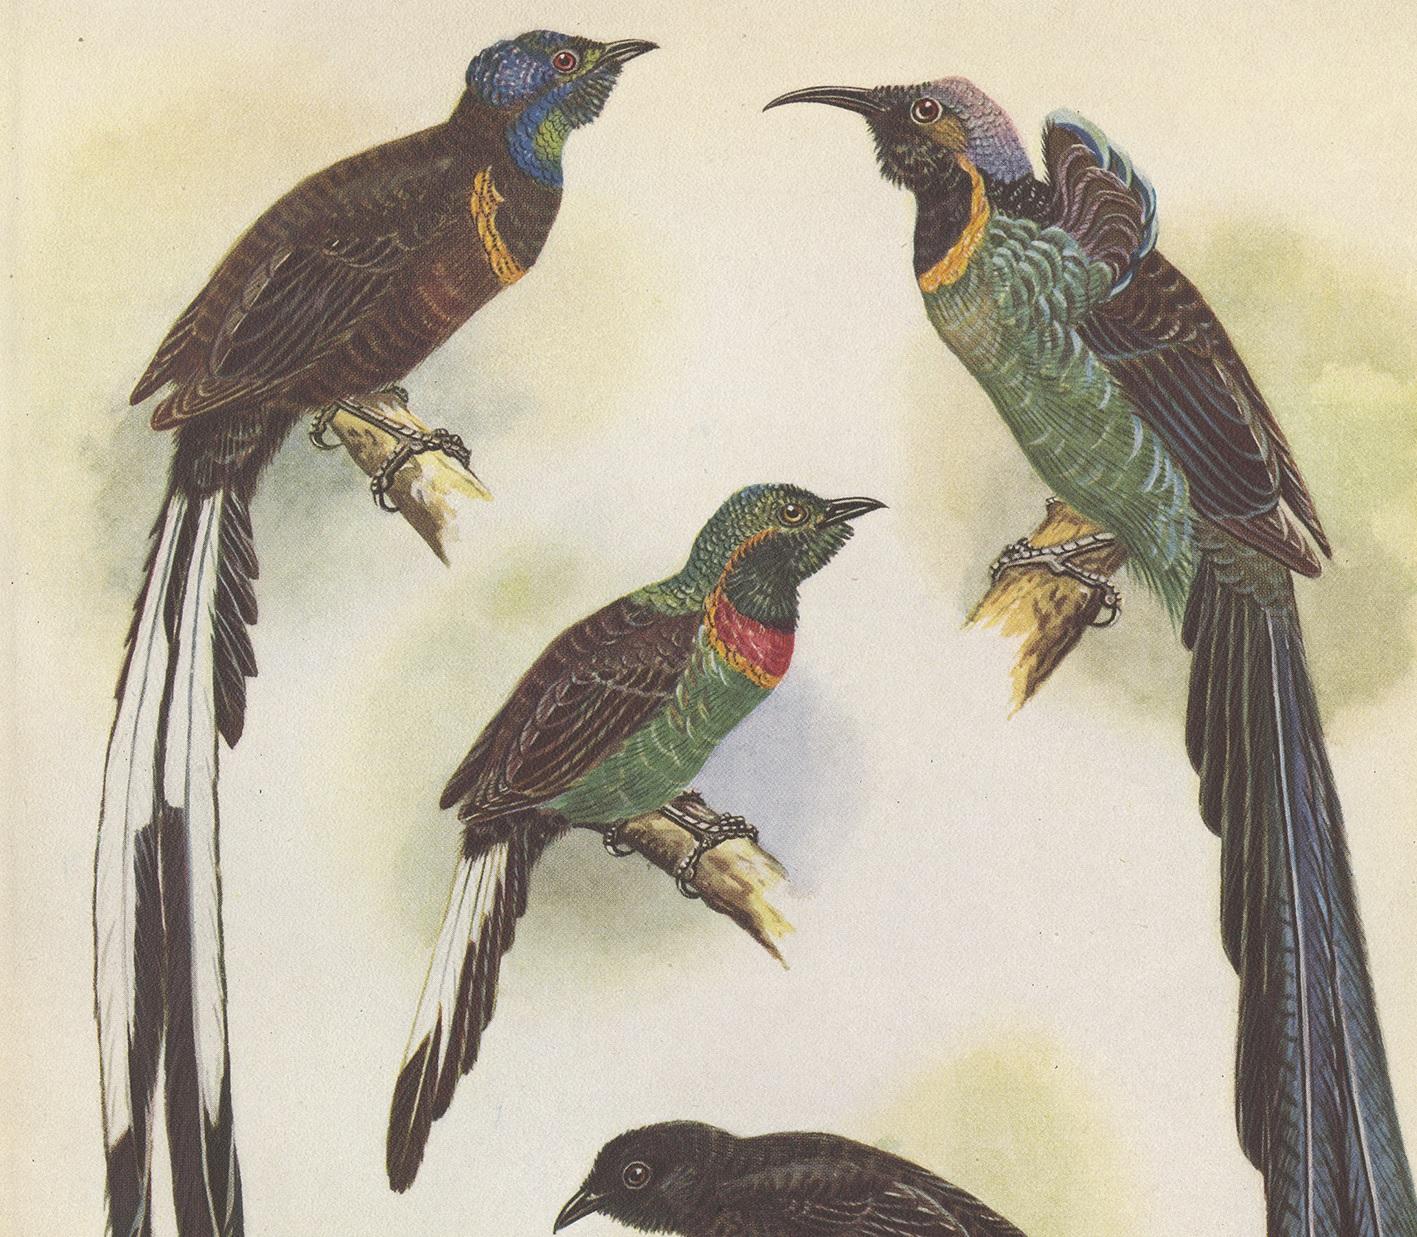 Decorative print illustrating the Green-Breasted Sickle Bill, Most Splendid Longtail and Barnes' Long-Tailed Bird of Paradise. This authentic print originates from 'Birds of Paradise and Bower Birds' by Tom Iredale. With coloured illustrations of